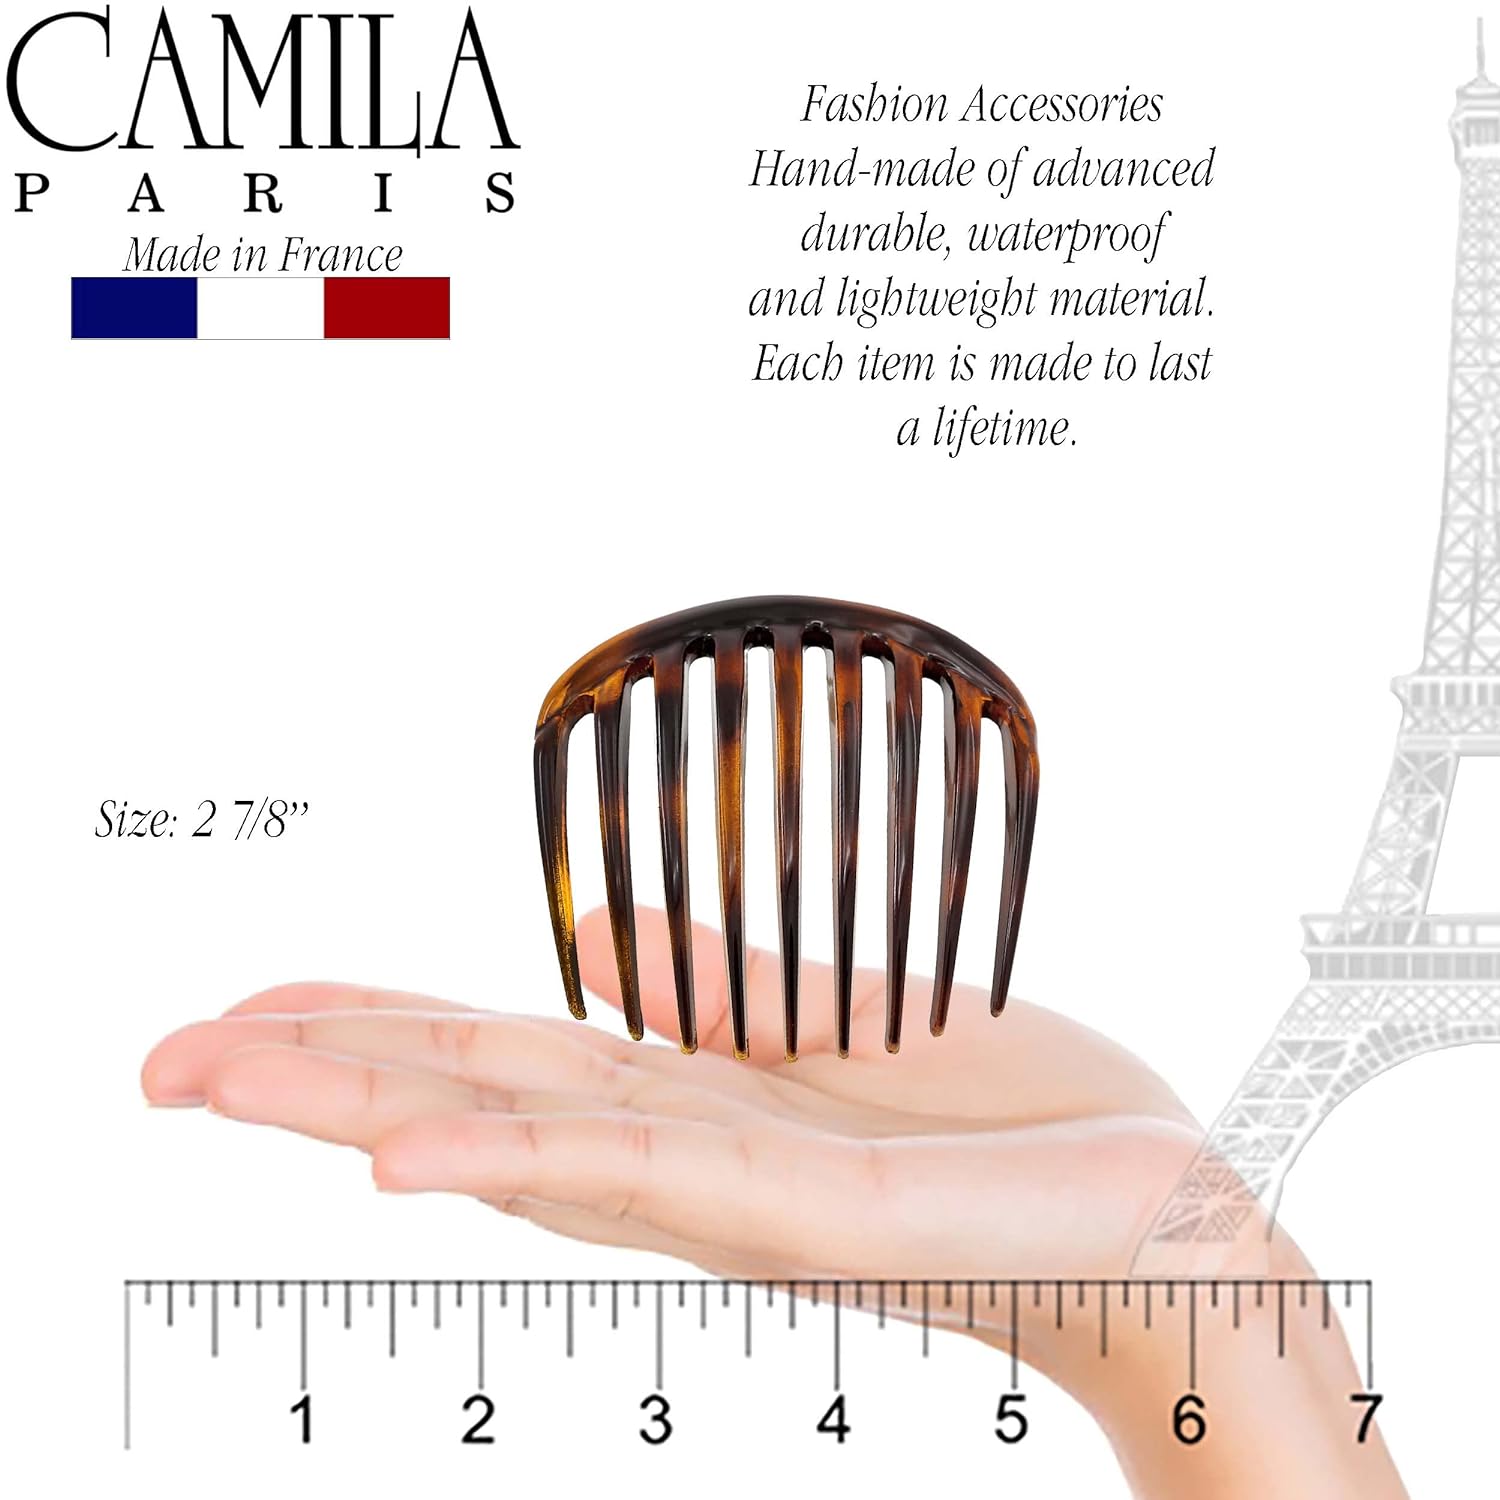 Camila Paris Small Decorative Round Hair Side Comb. Made in France